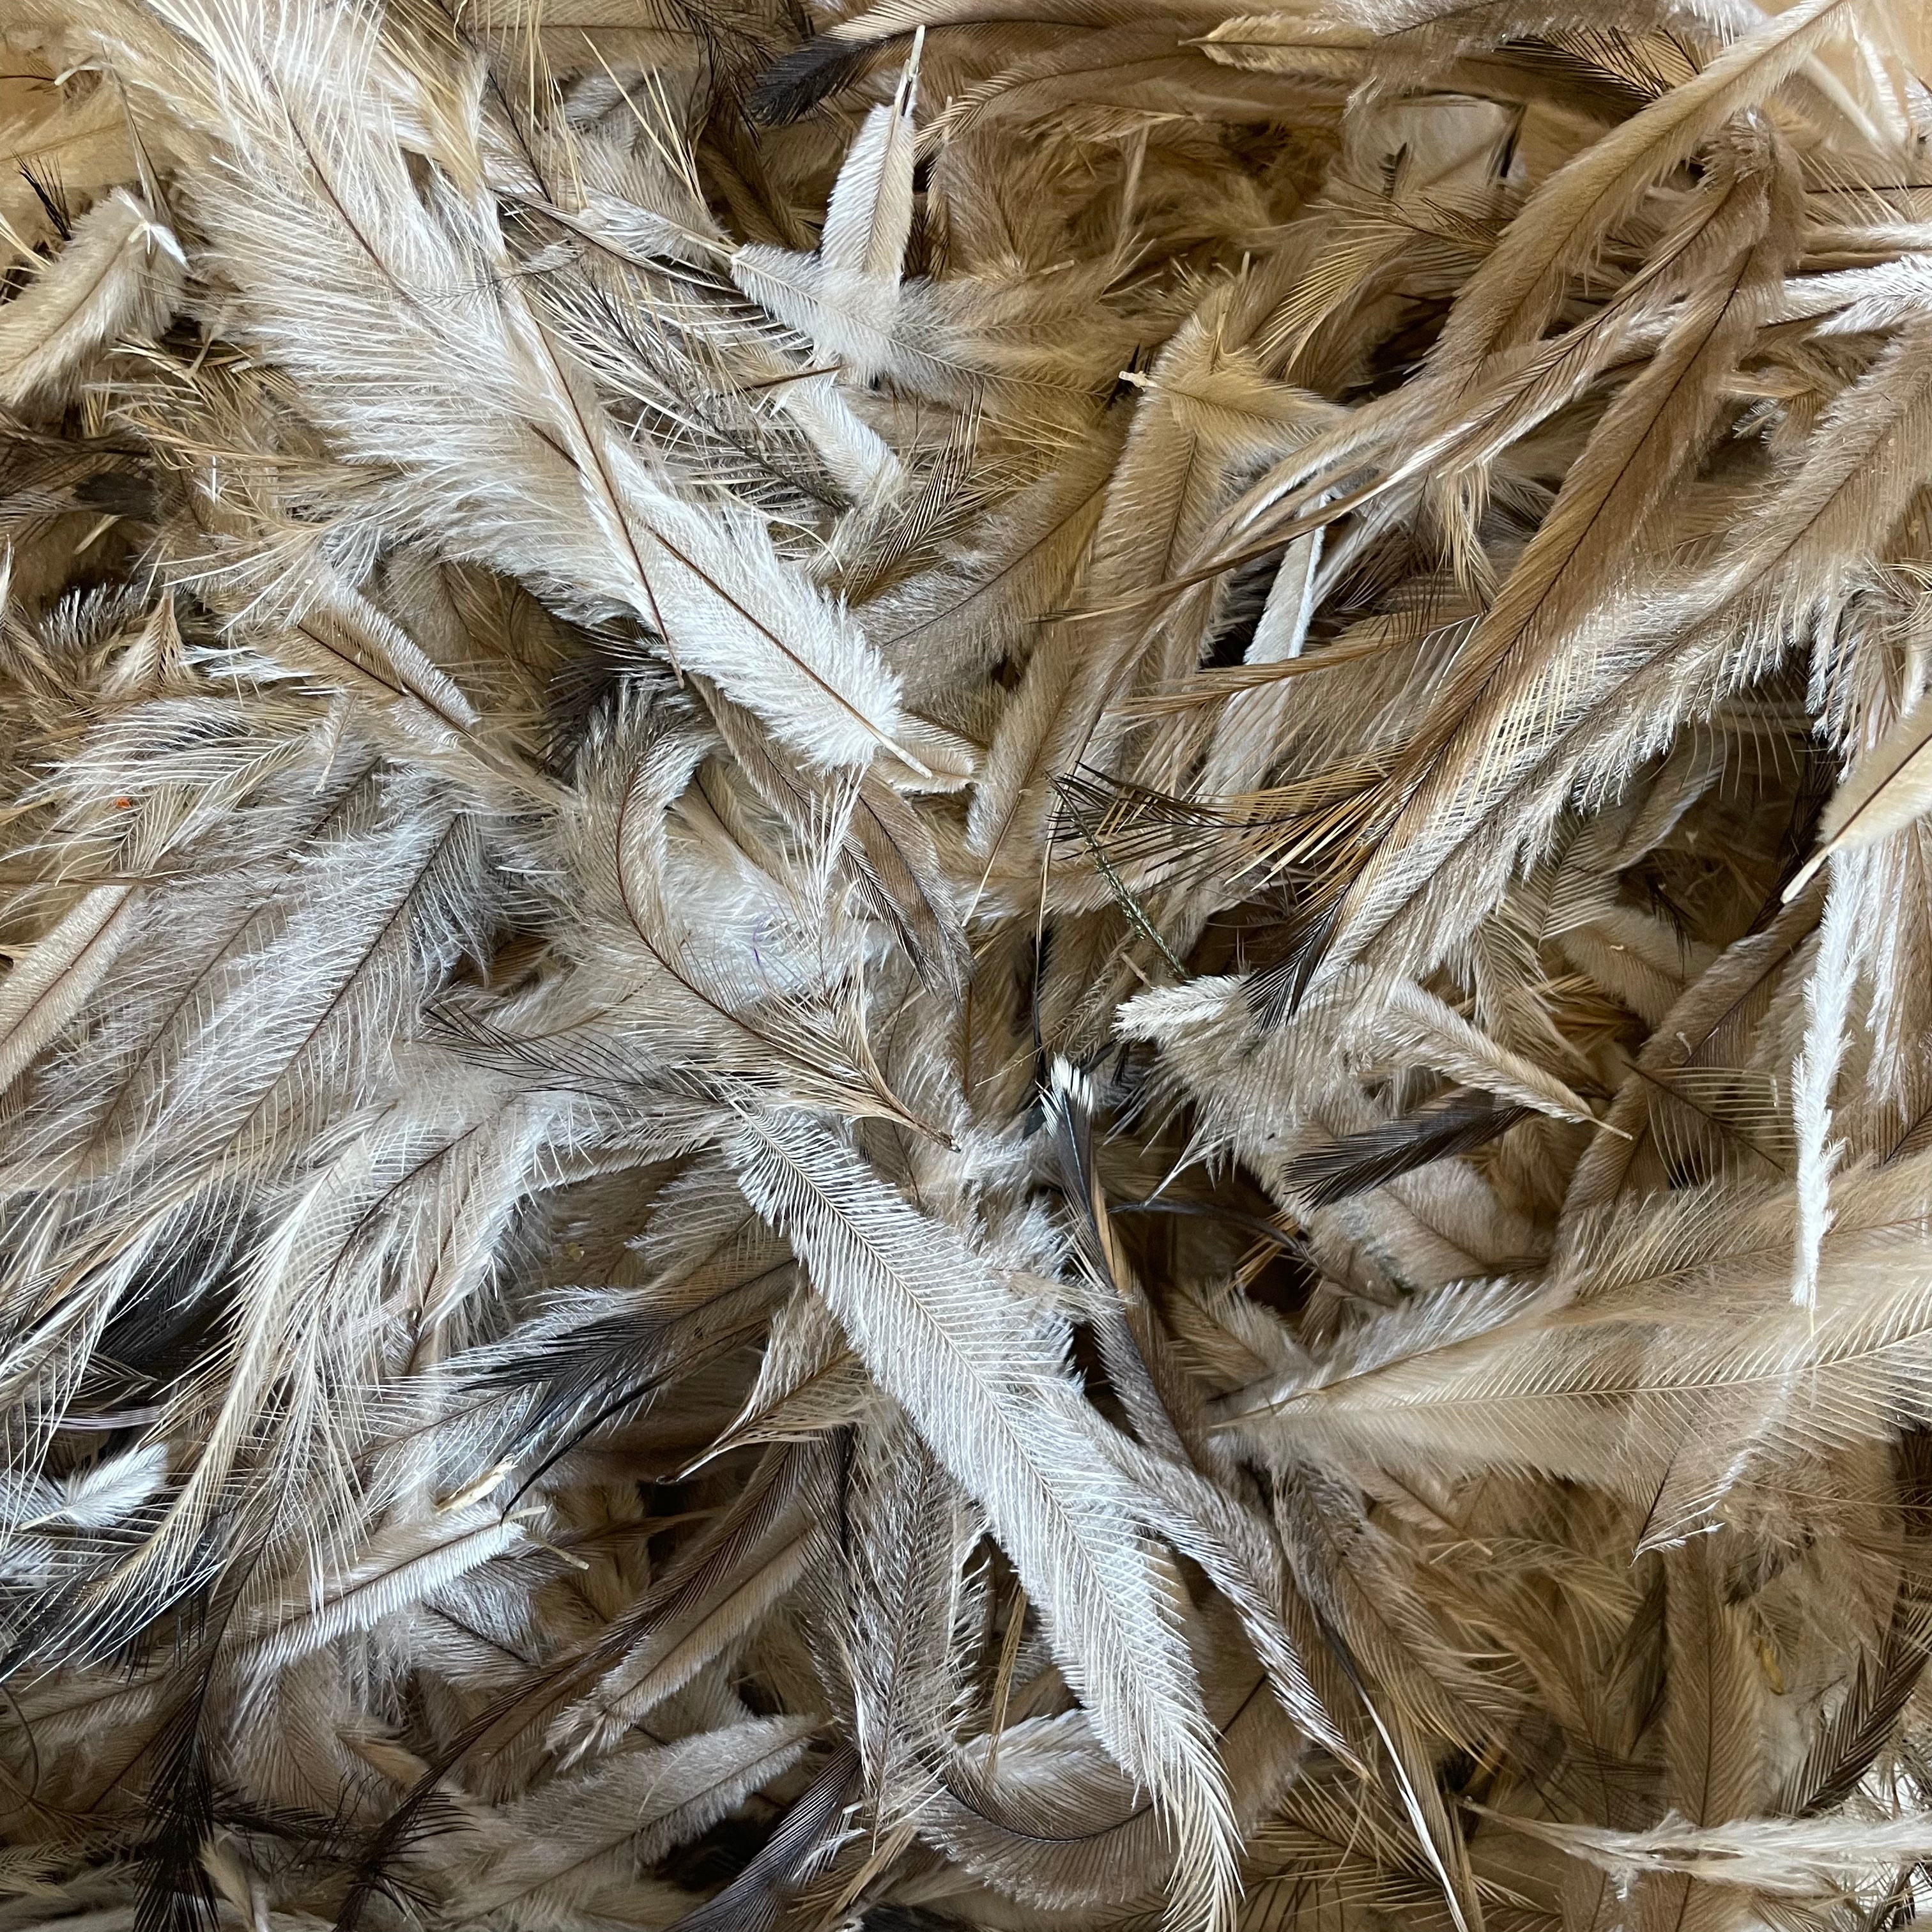 Emu Feathers 5 grams - Natural